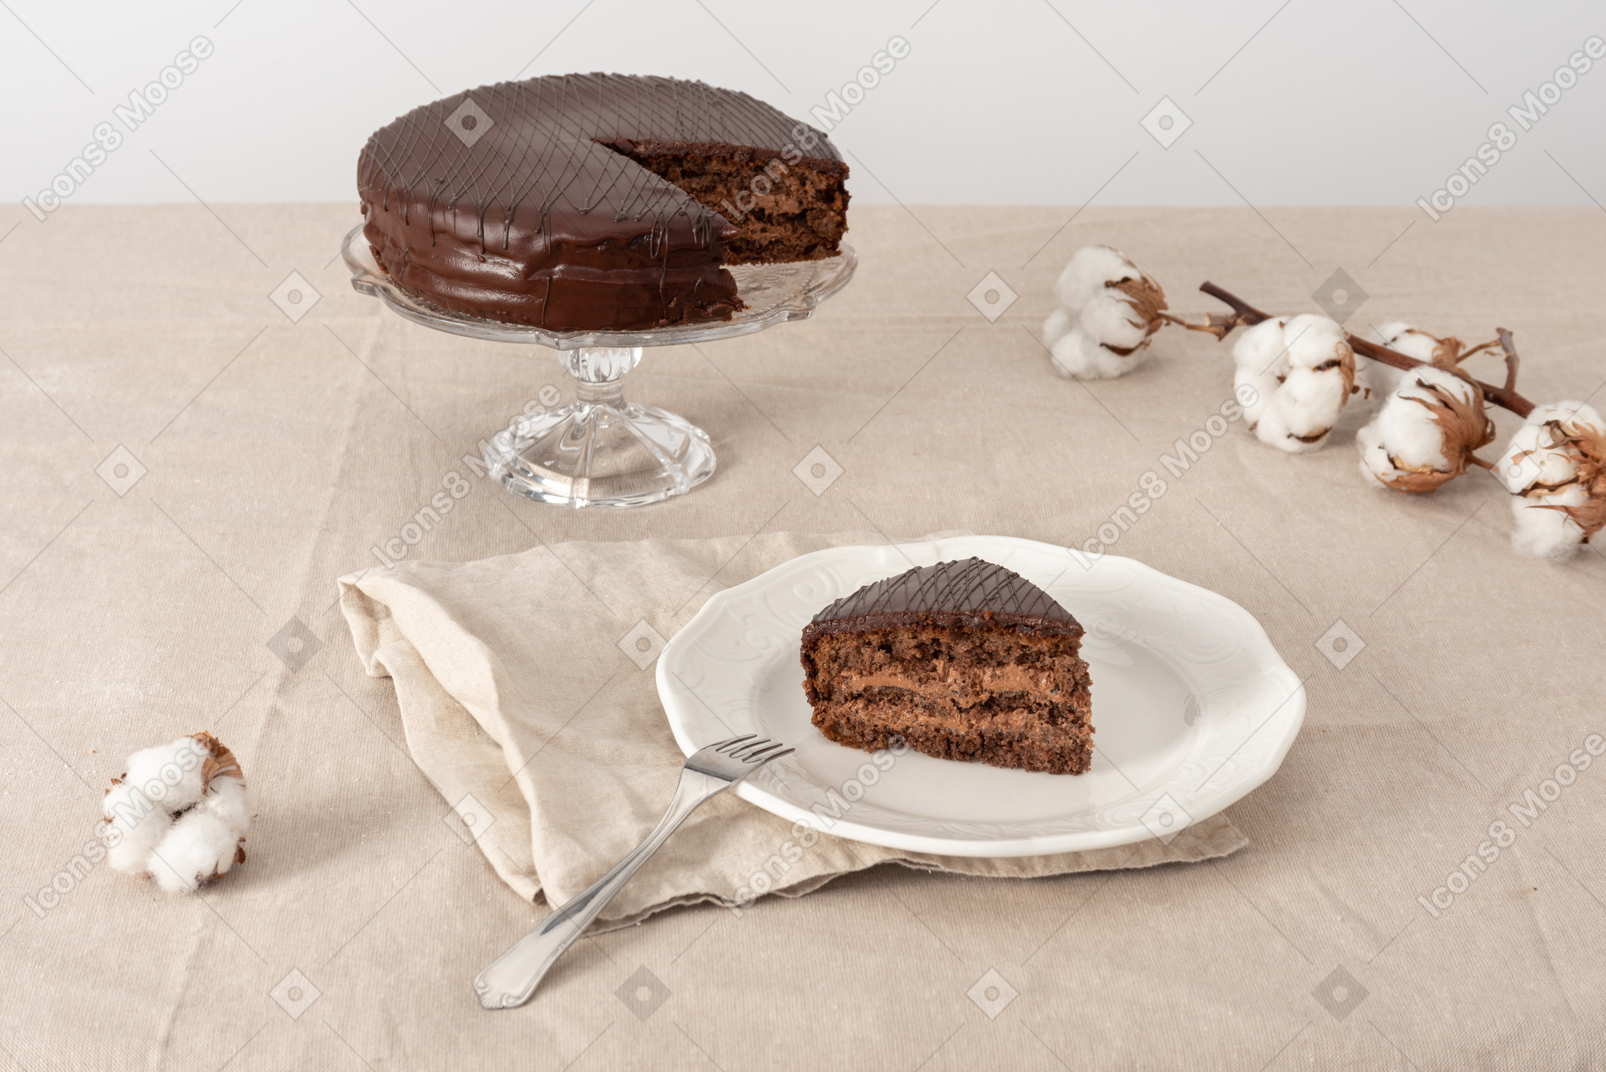 Chocolate caje on cake stand, piece of cake on the plate and cotton branches